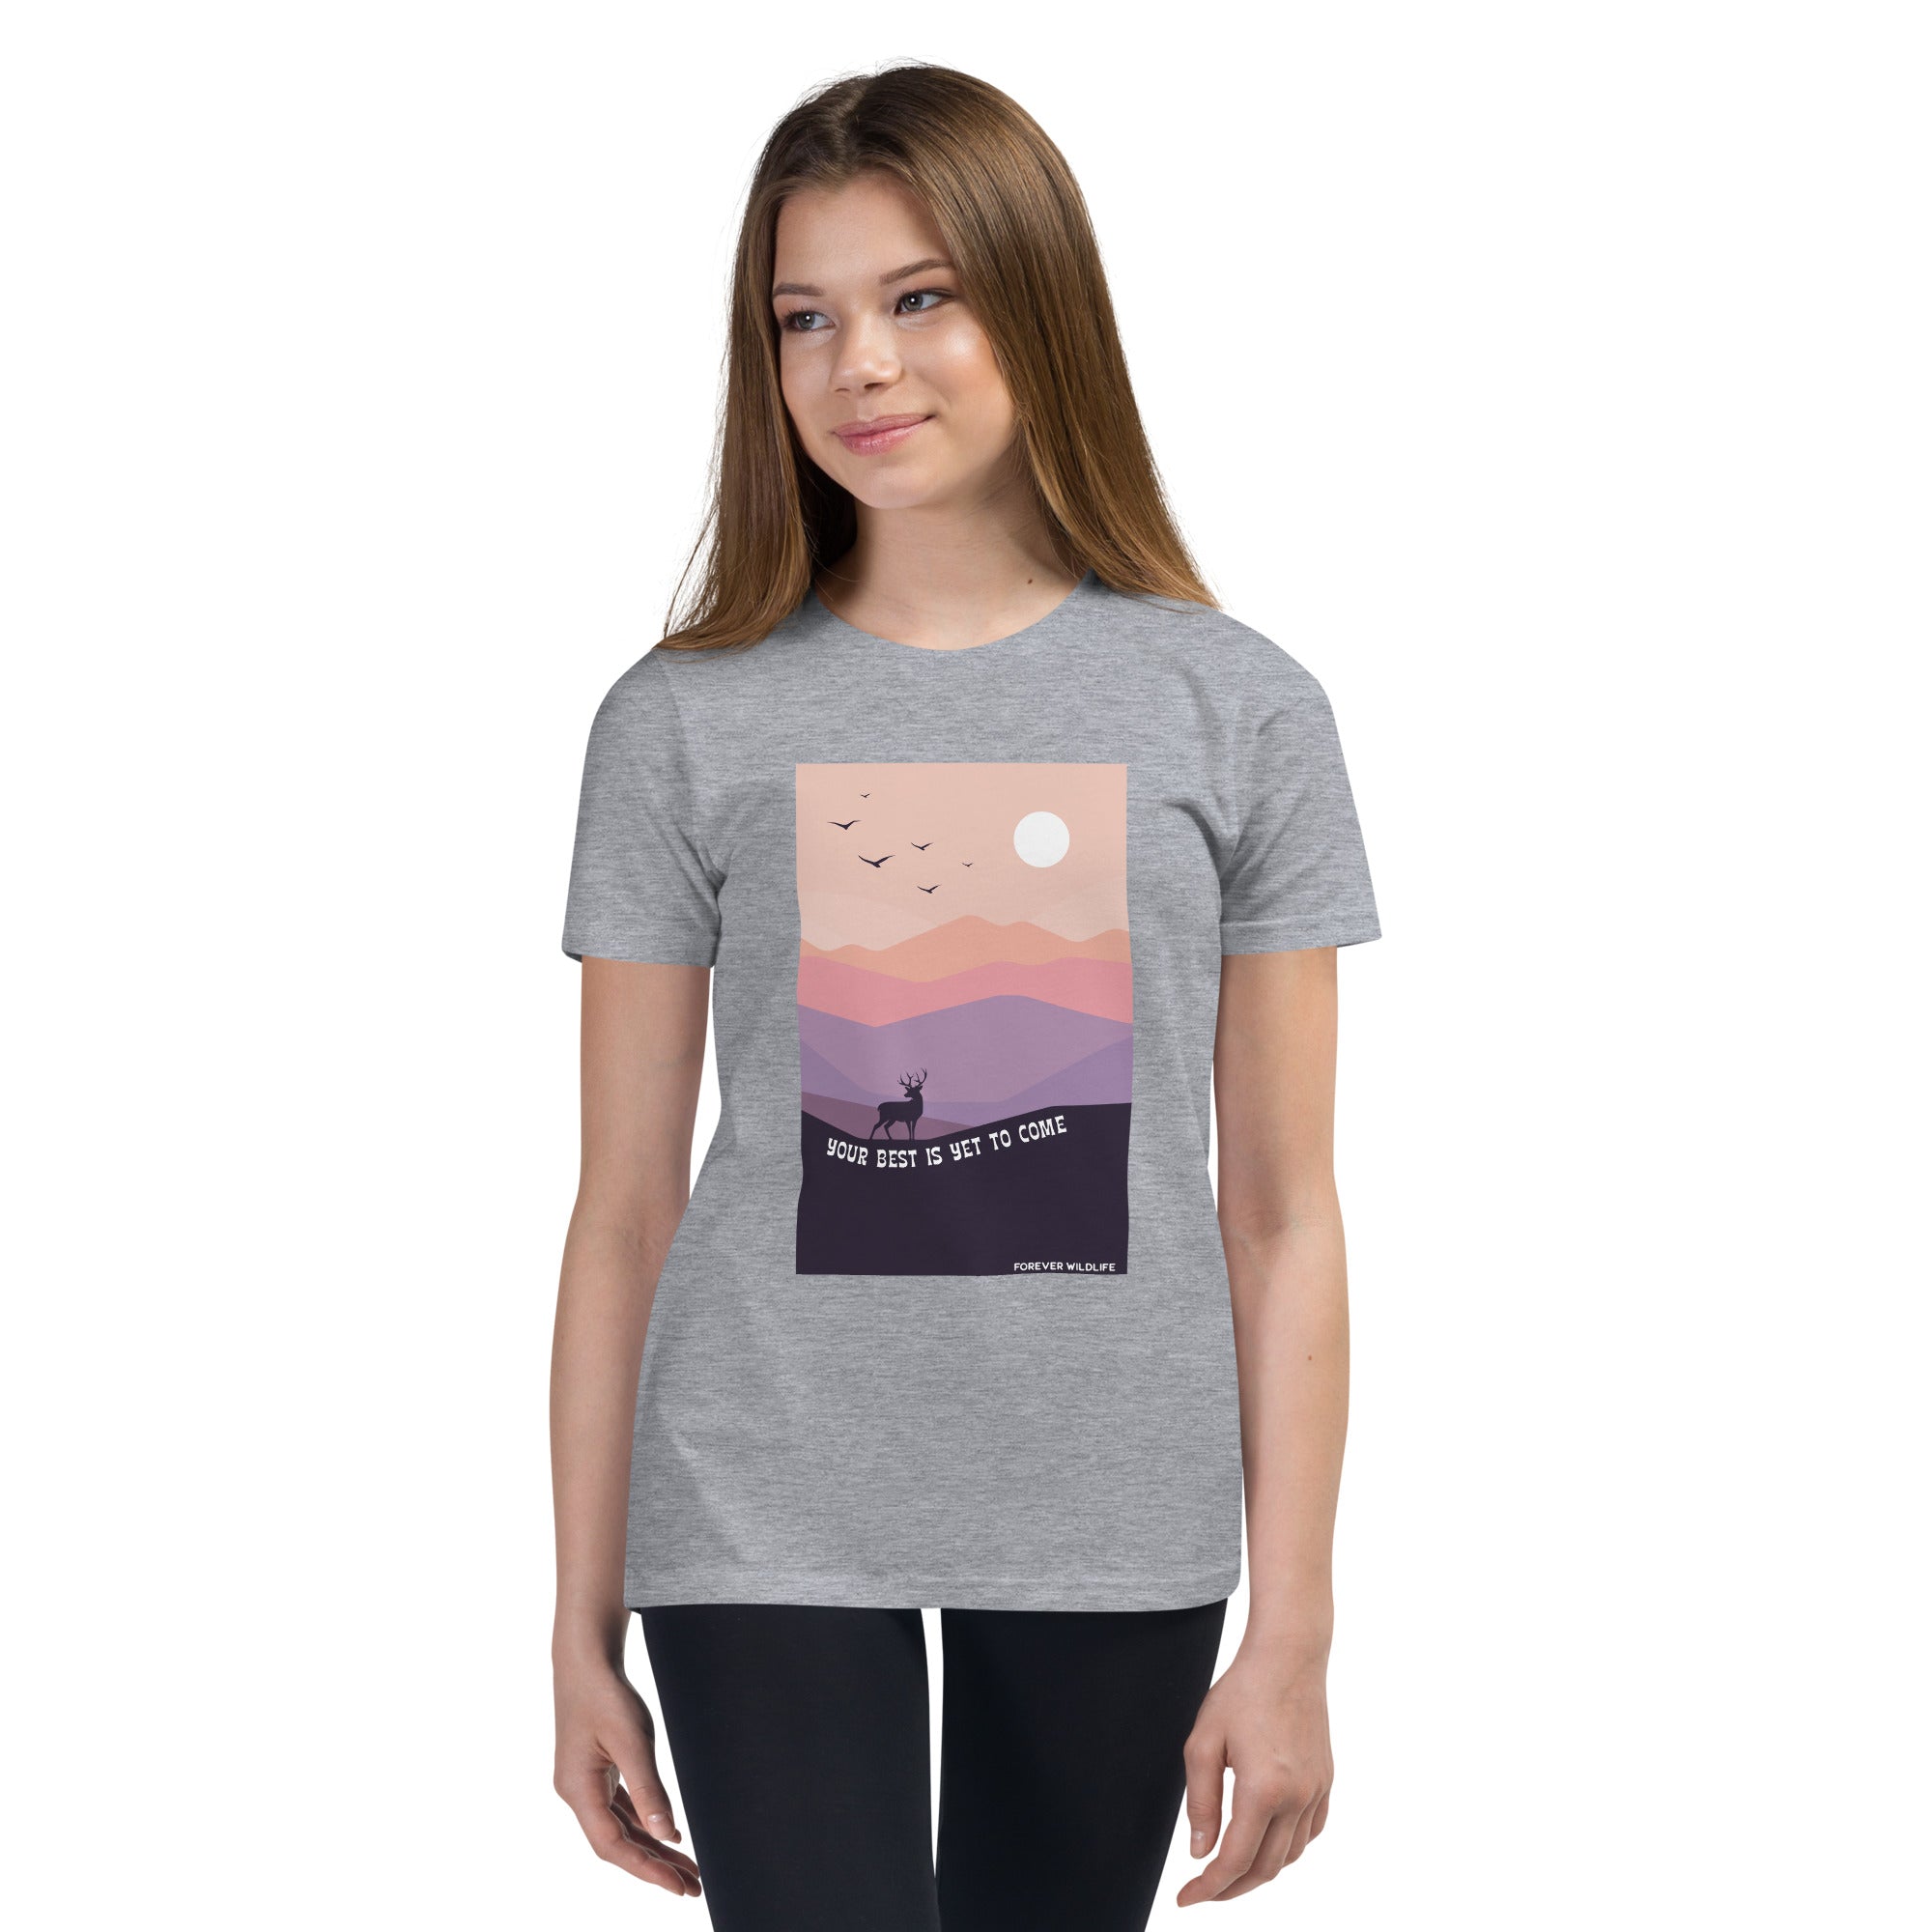 Teen wearing Grey Deer Youth T-Shirt with deer graphic as part of Wildlife T-Shirts, Wildlife Clothing & Apparel